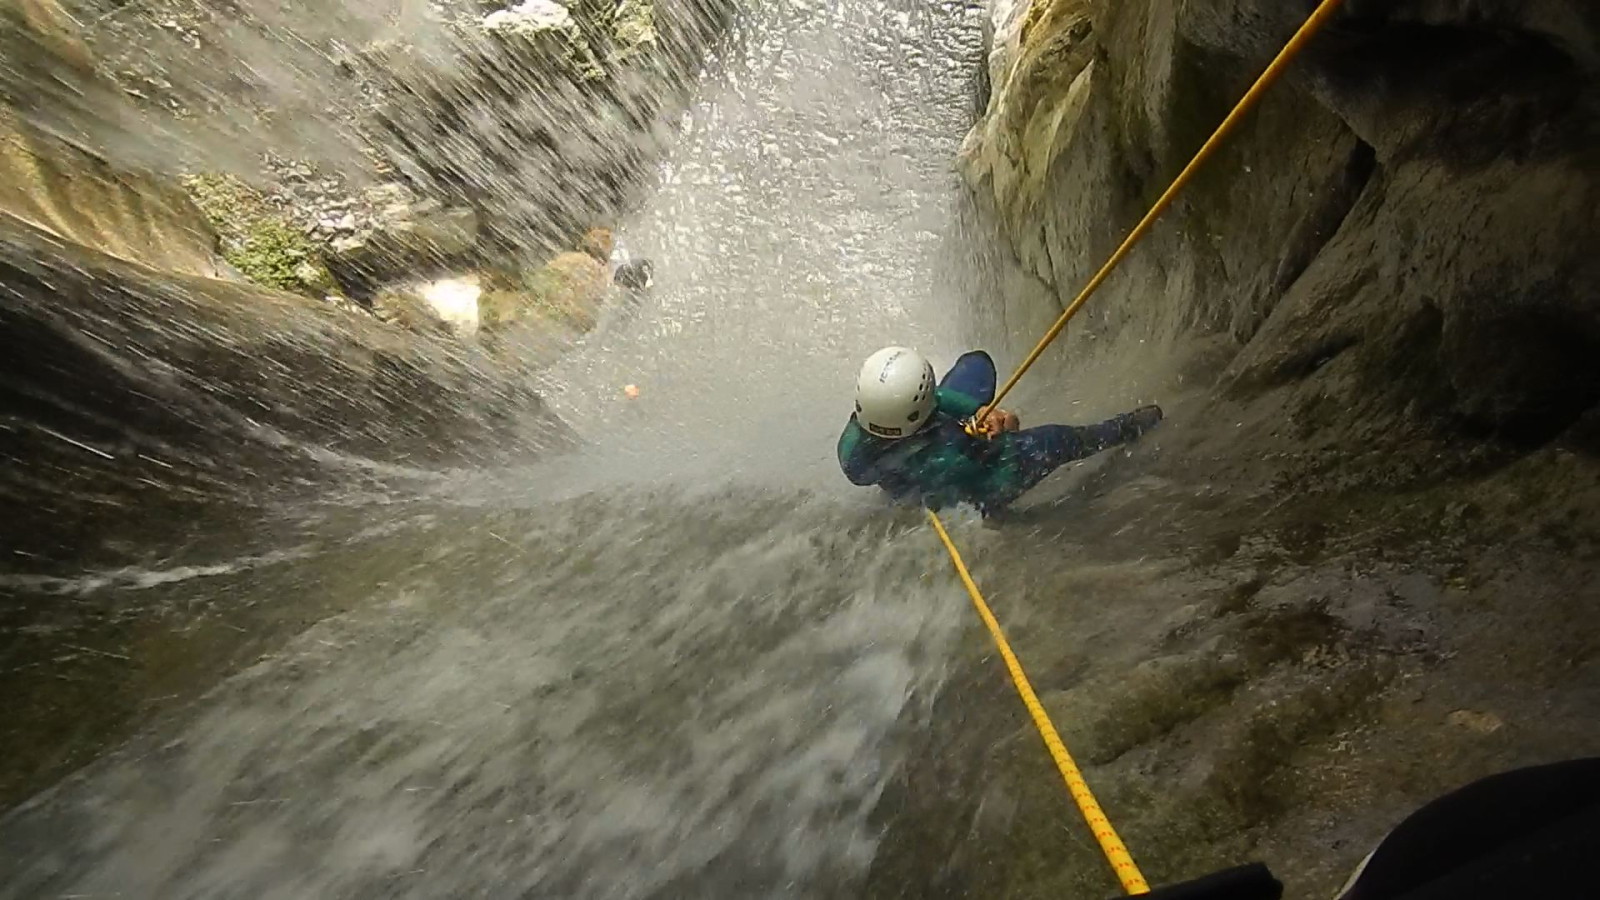 Slide in the 25-metre abseil